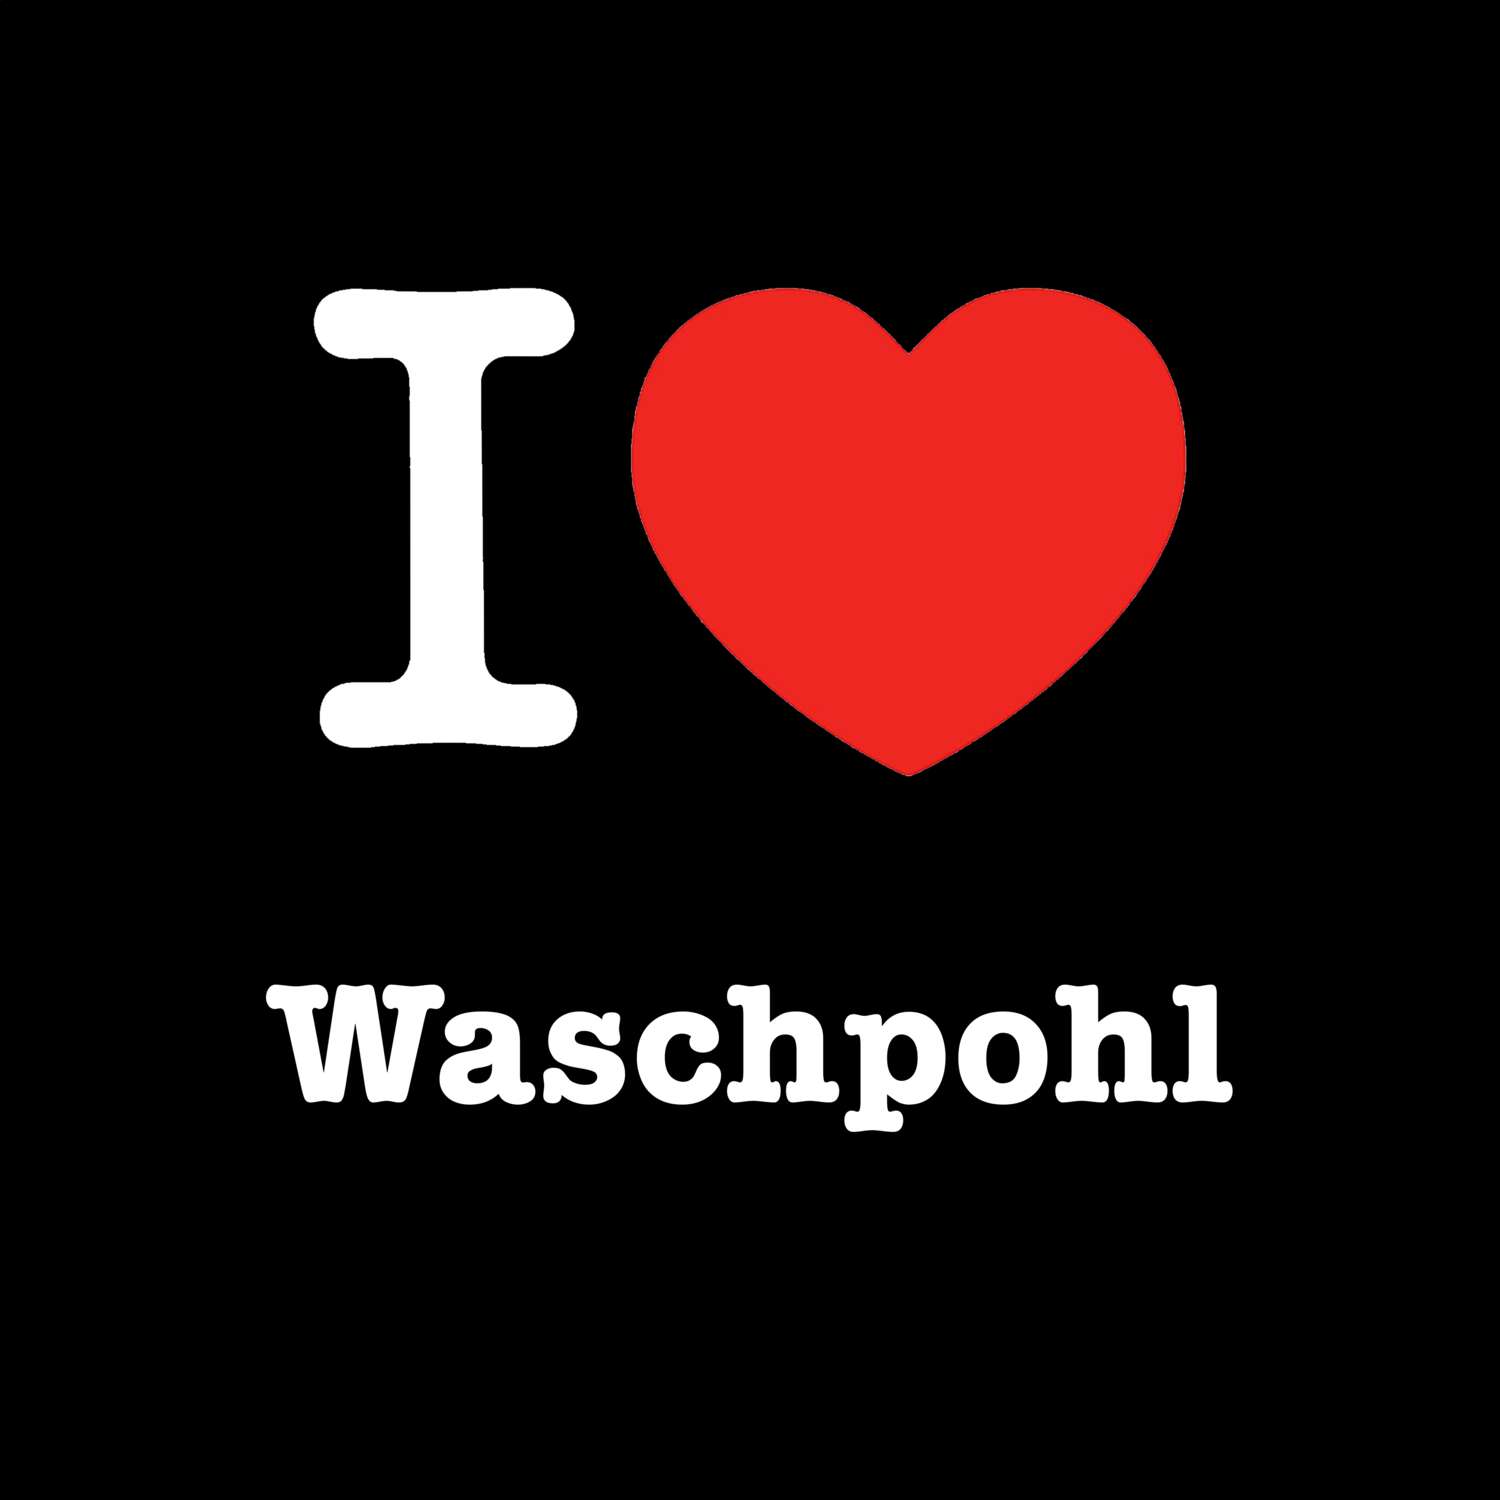 Waschpohl T-Shirt »I love«